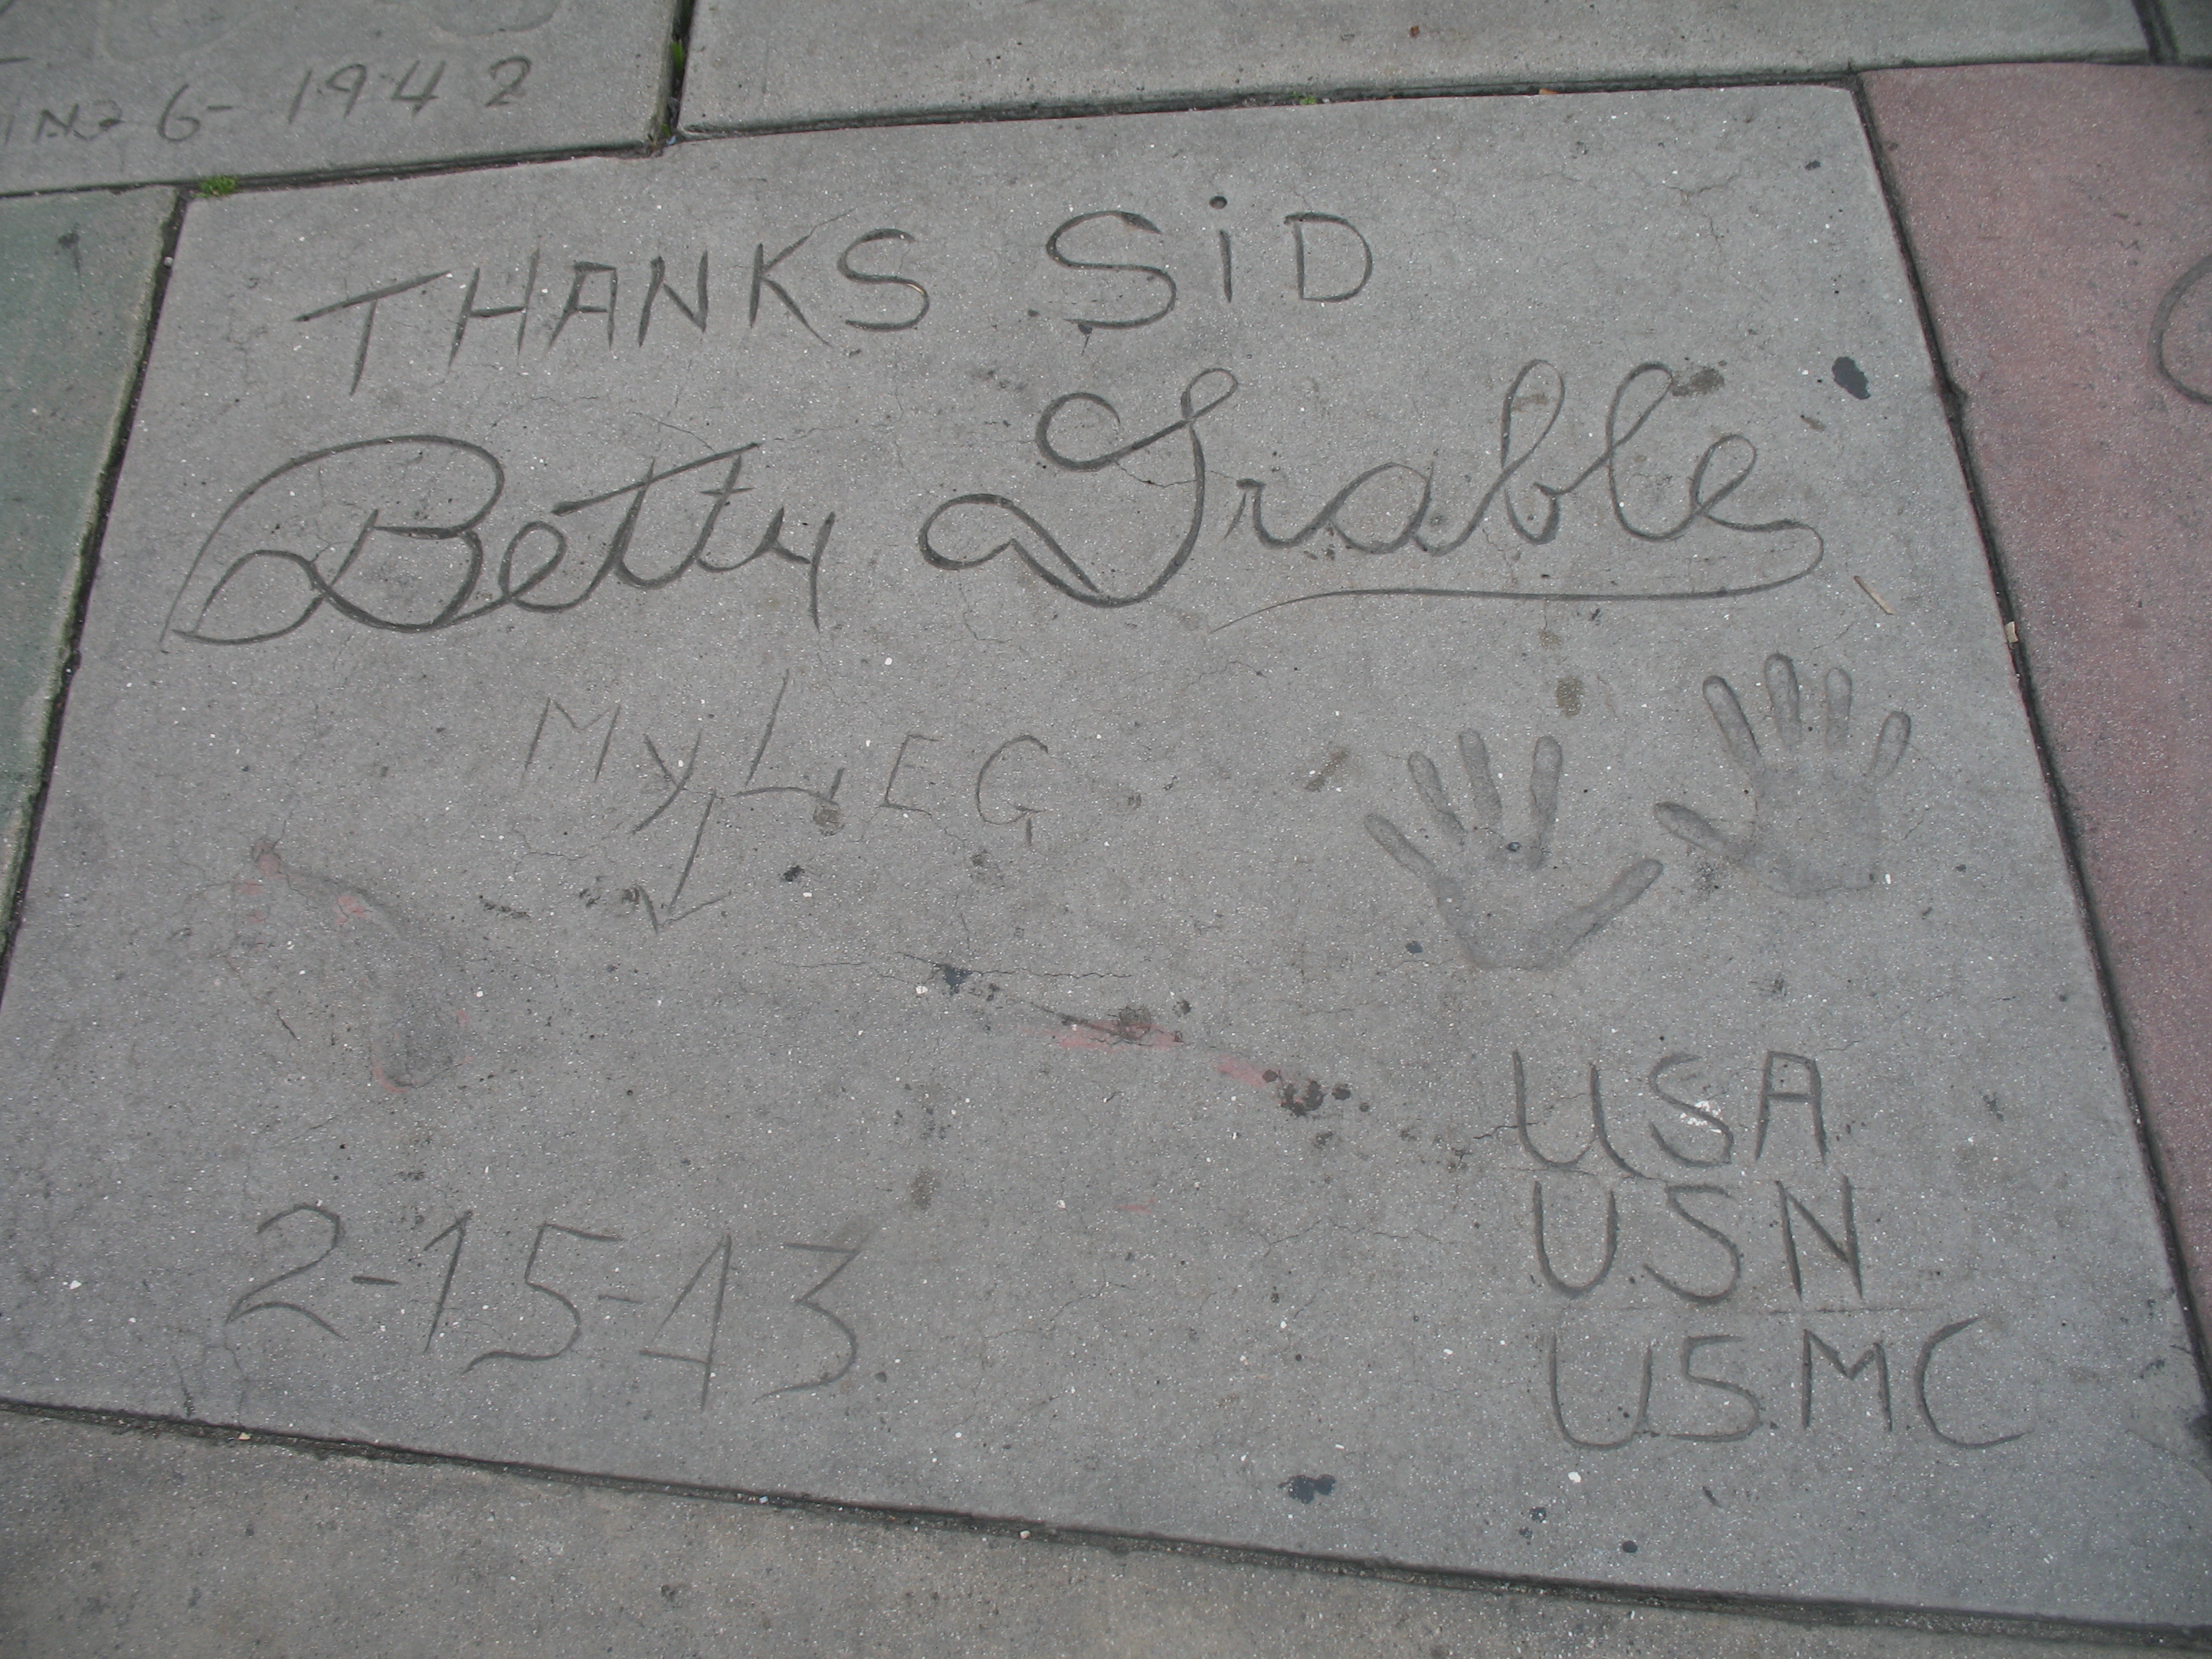 Betty_Grable_Grauman's_Chinese_Theatre - 